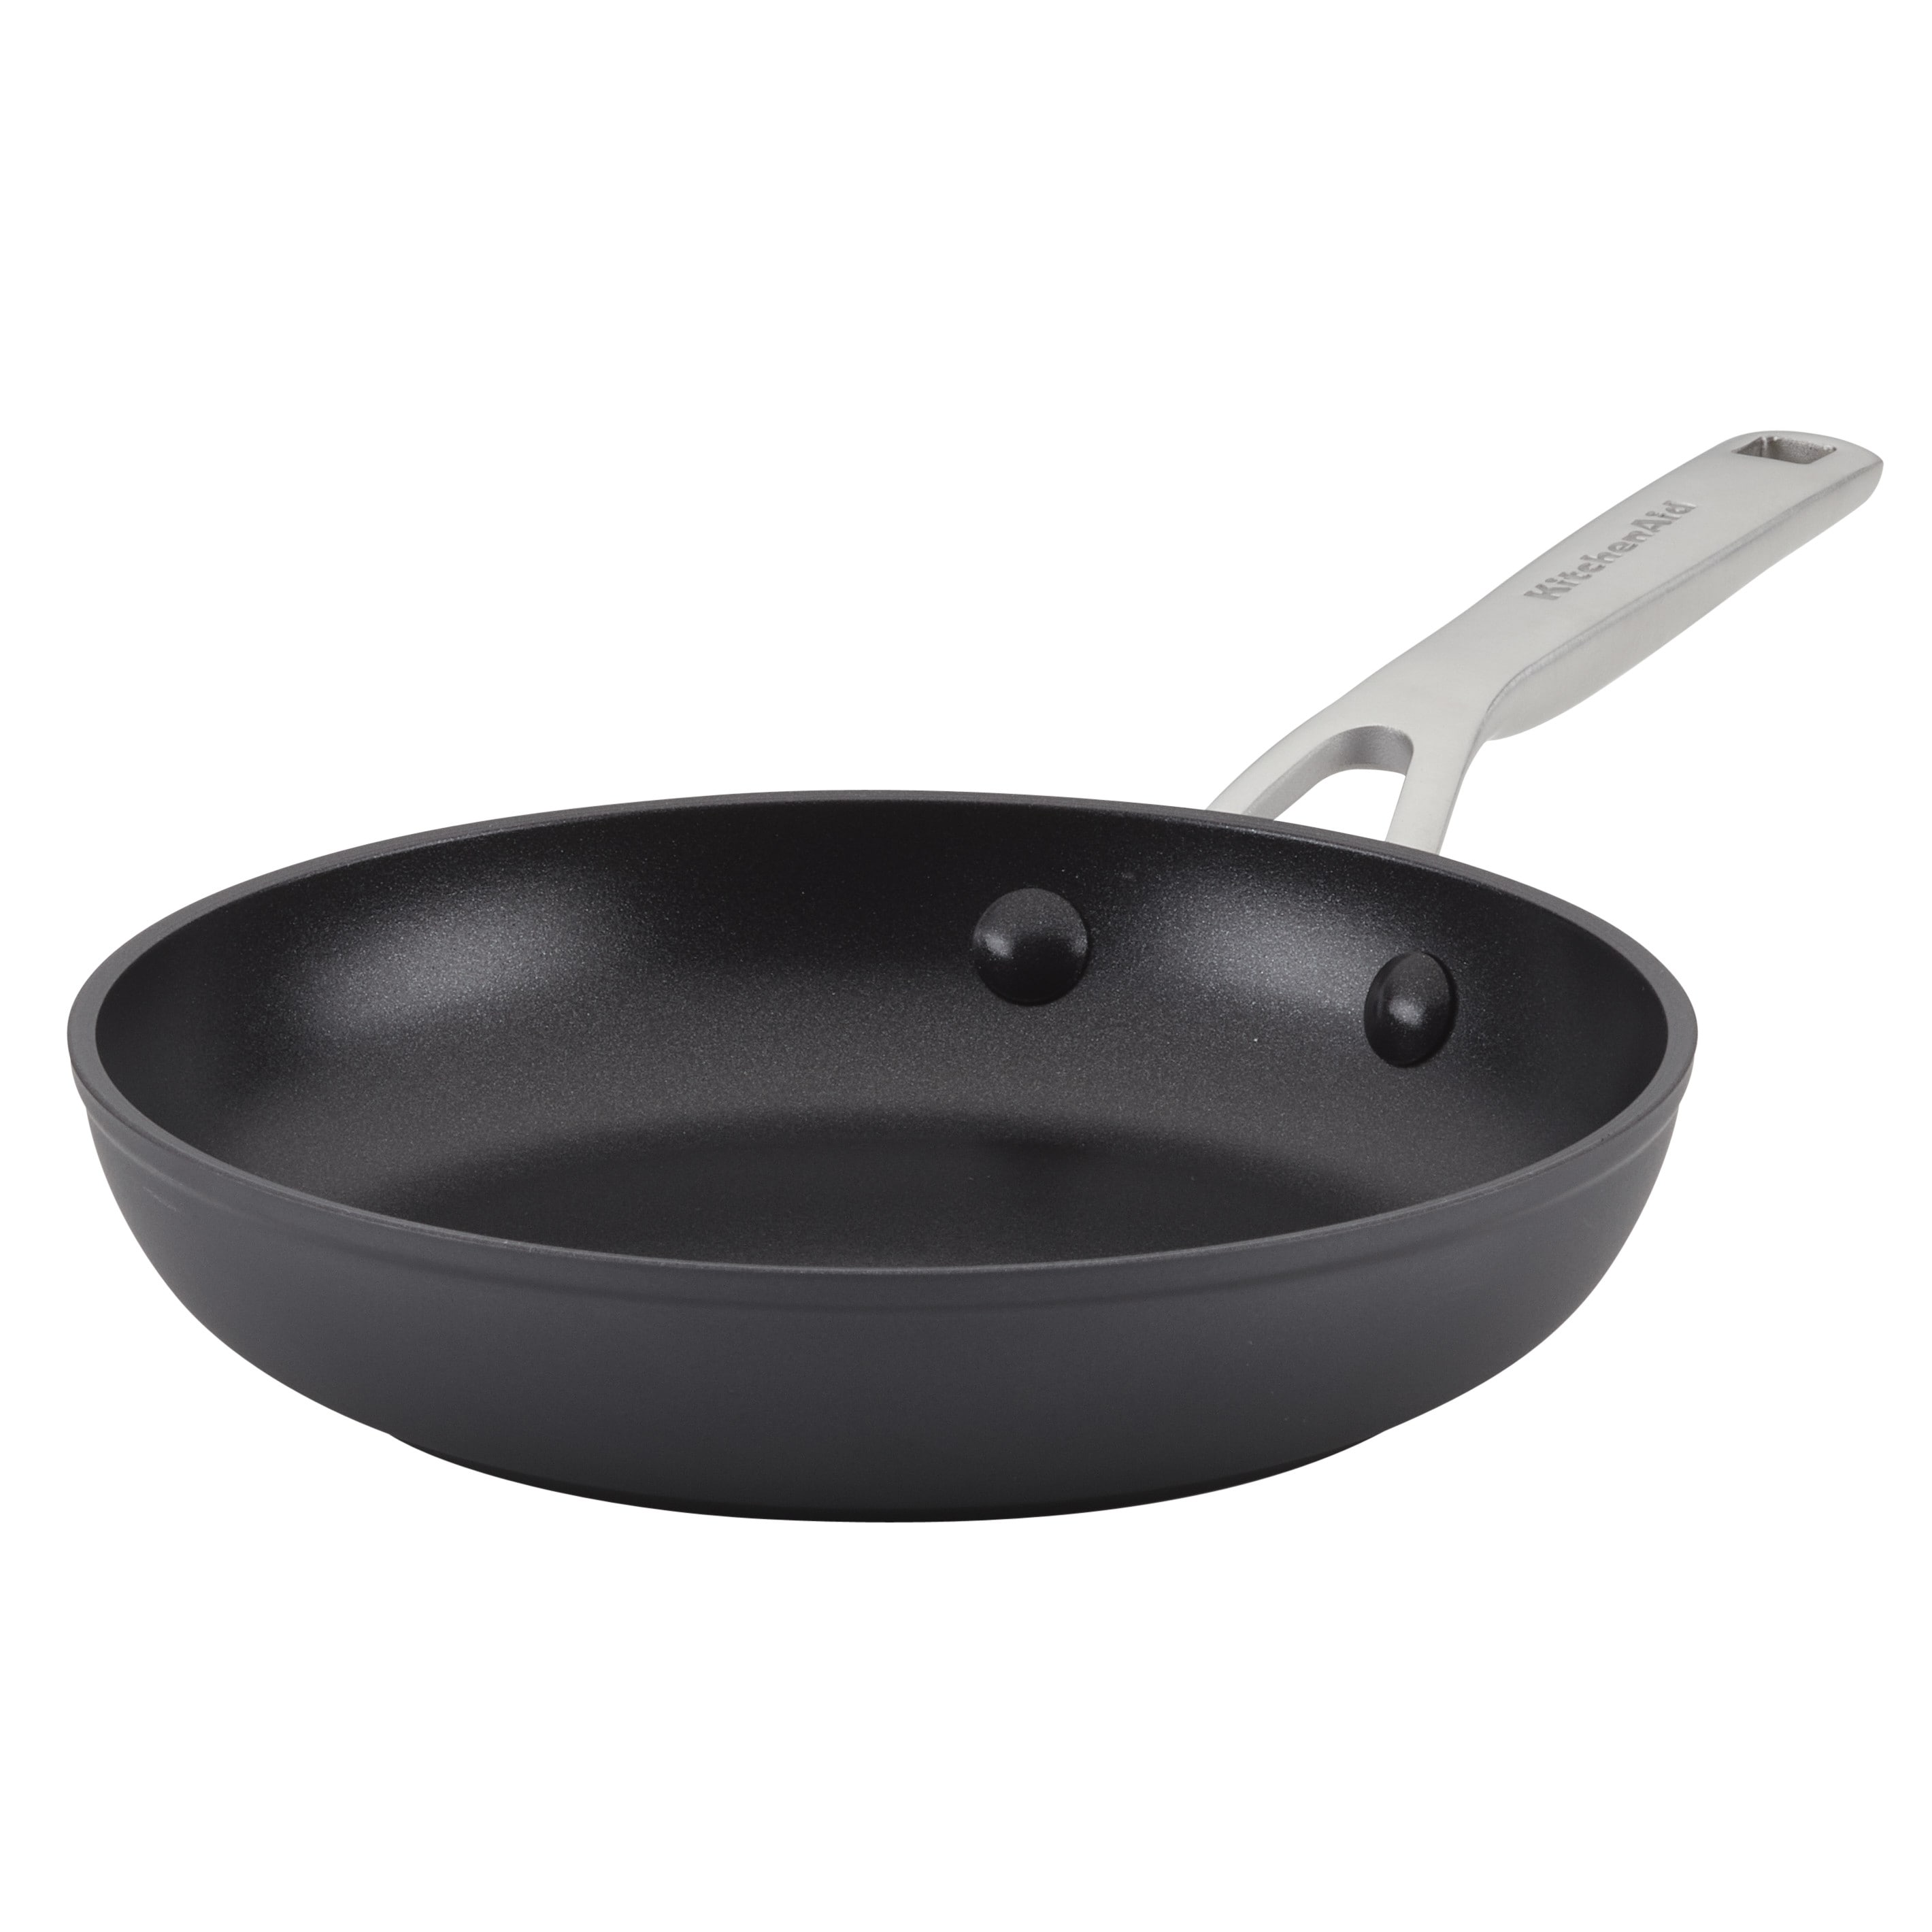 https://ak1.ostkcdn.com/images/products/is/images/direct/1c15e610dfde47c0bb2d52f17afb2293be671340/KitchenAid-Hard-Anodized-Induction-Nonstick-Frying-Pan%2C-8.25-Inch%2C-Matte-Black.jpg